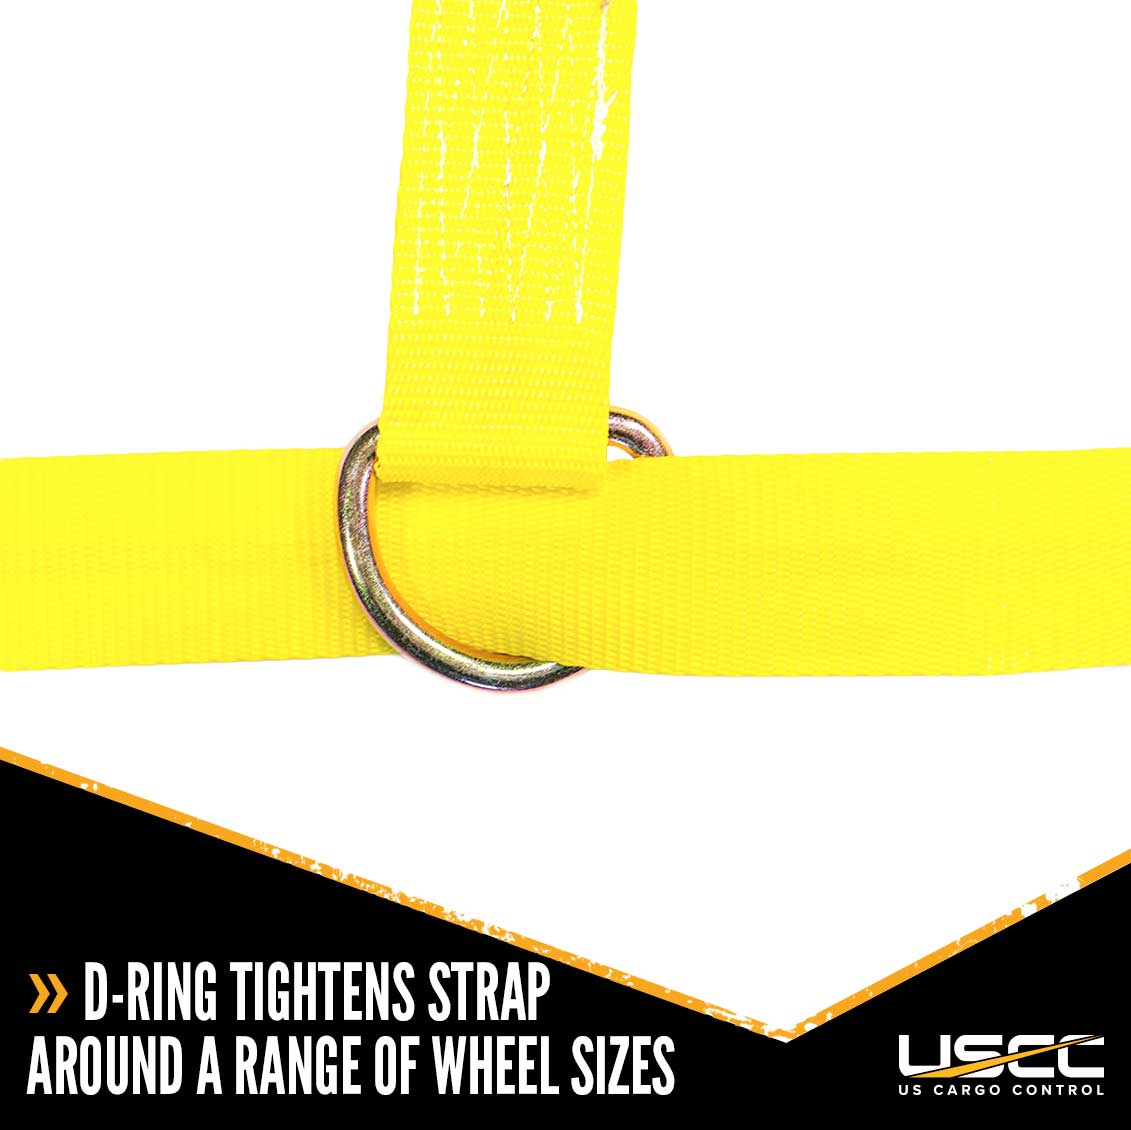 Yellow Adjustable Tow Dolly Strap with 2 Top Strap and Twisted Snap Hook 2 pack image 6 of 8